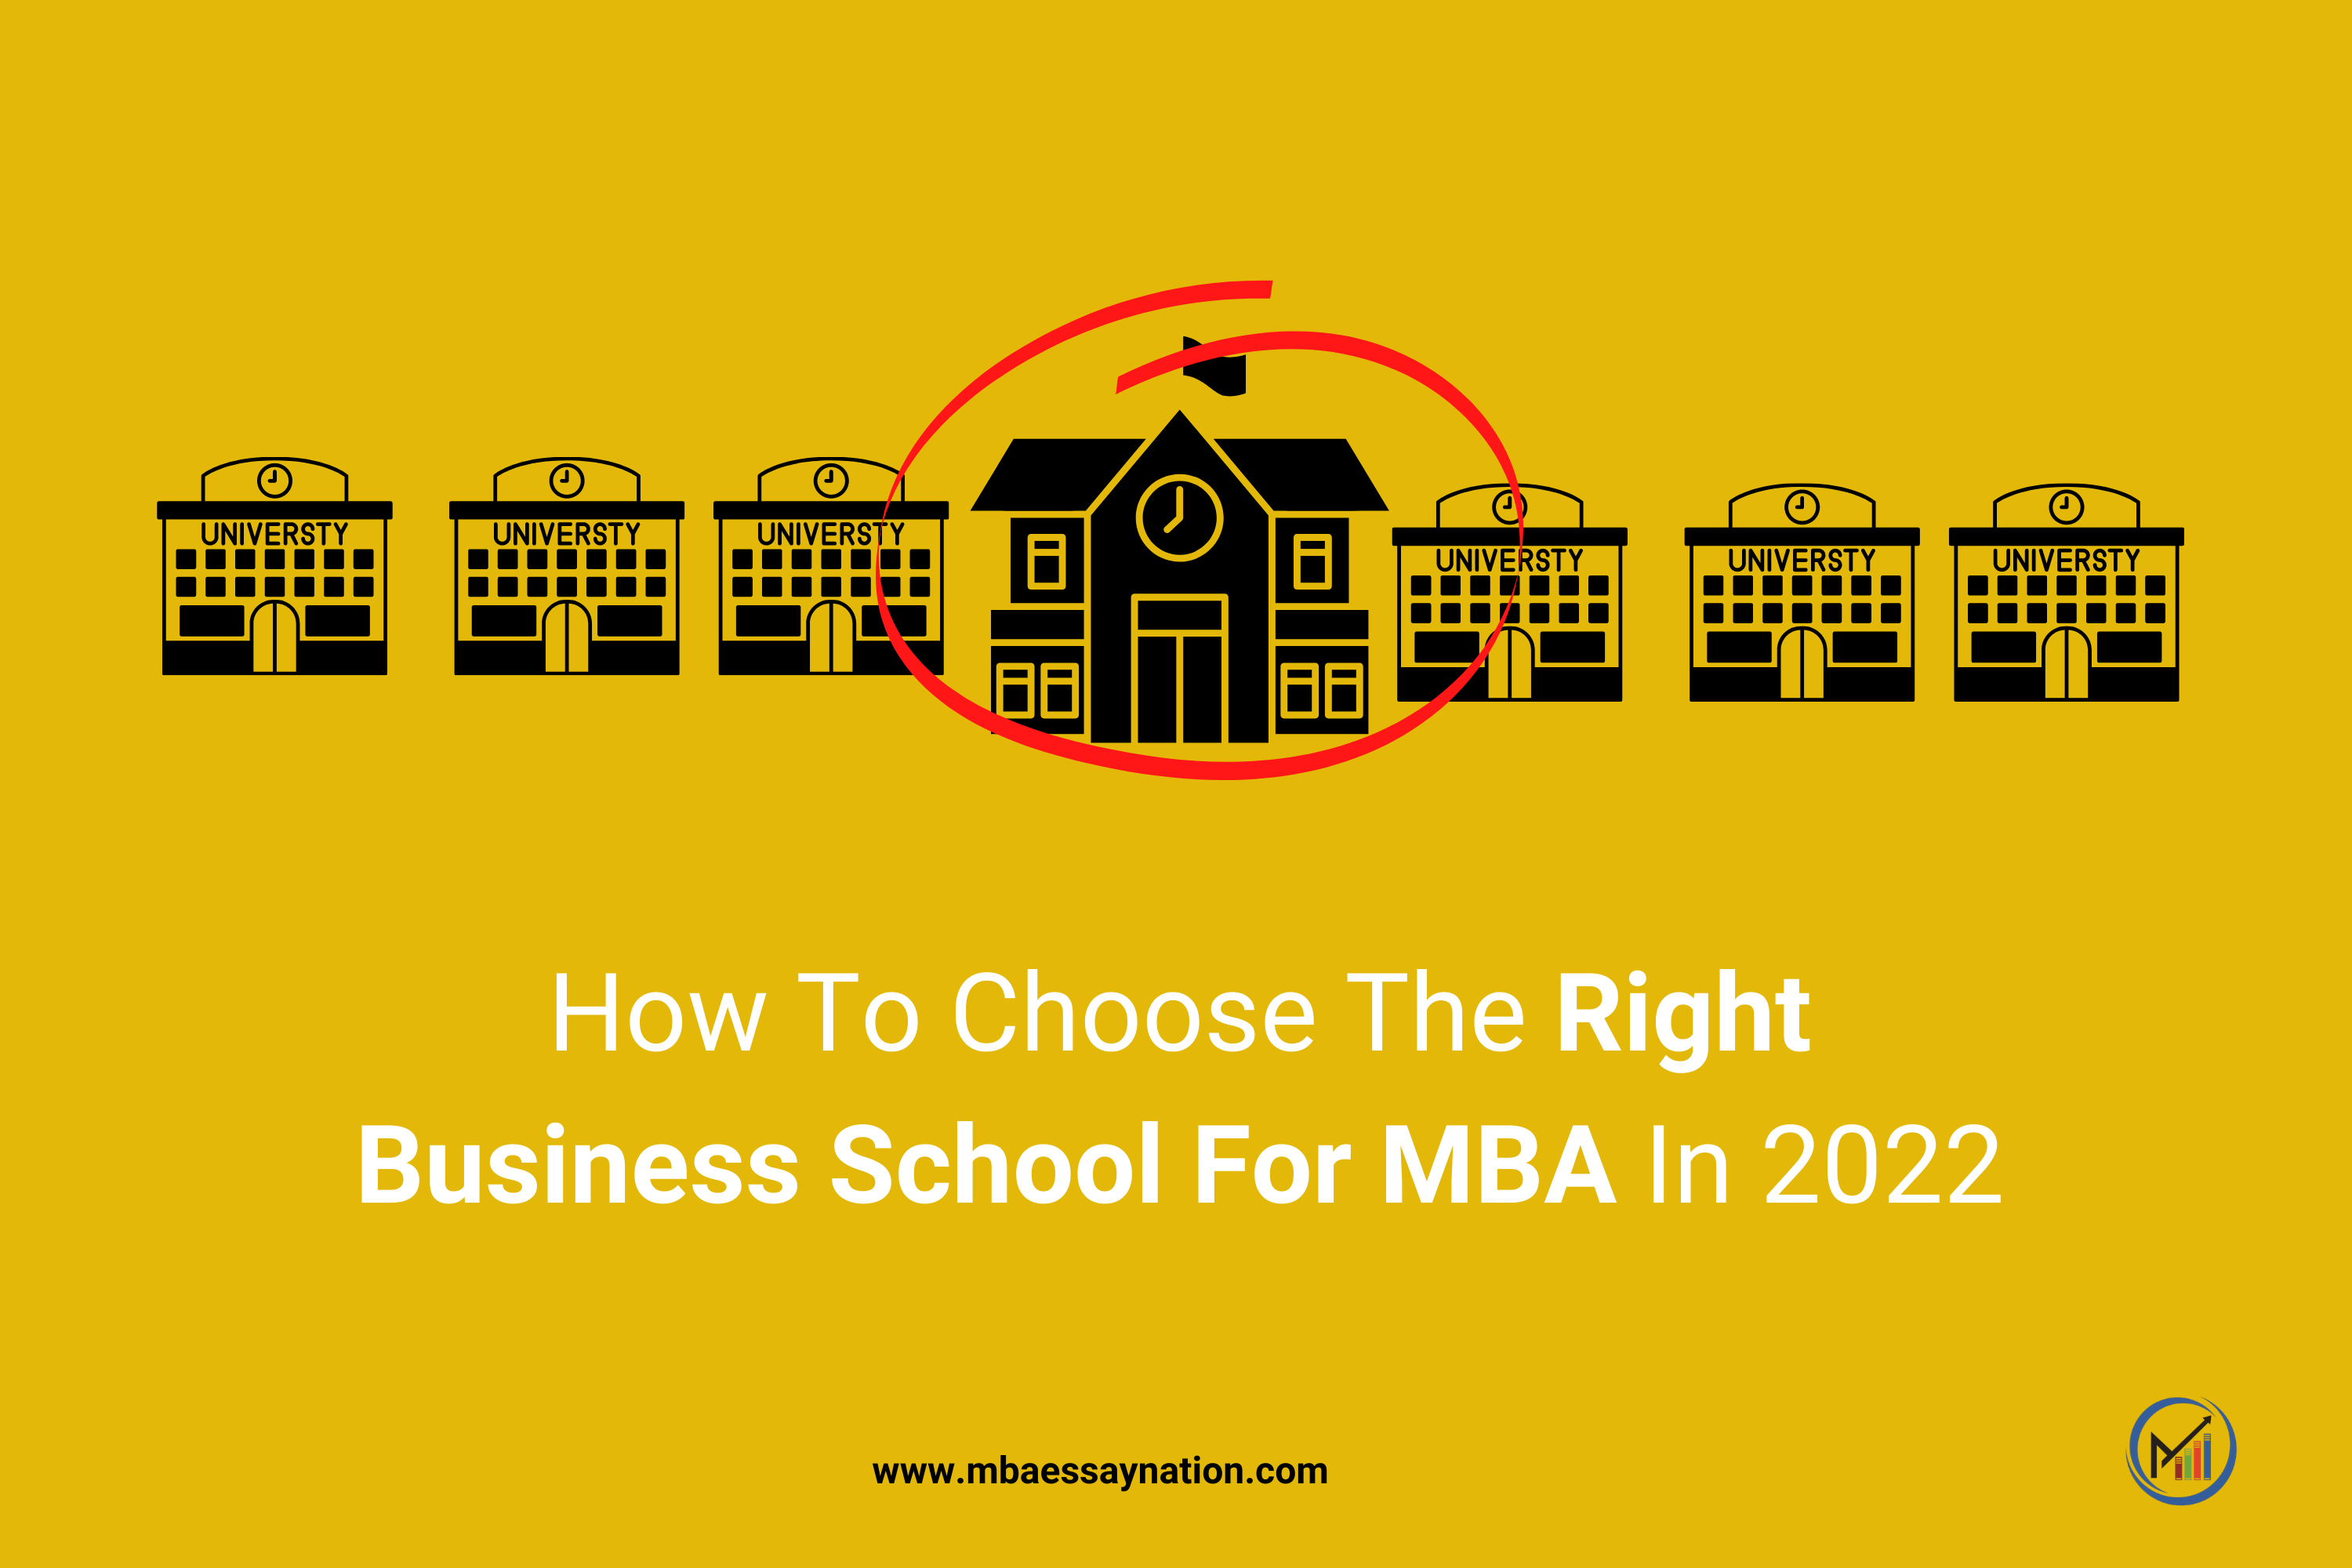 The Ultimate Guide On How To Choose The Right Business School For MBA In 2022